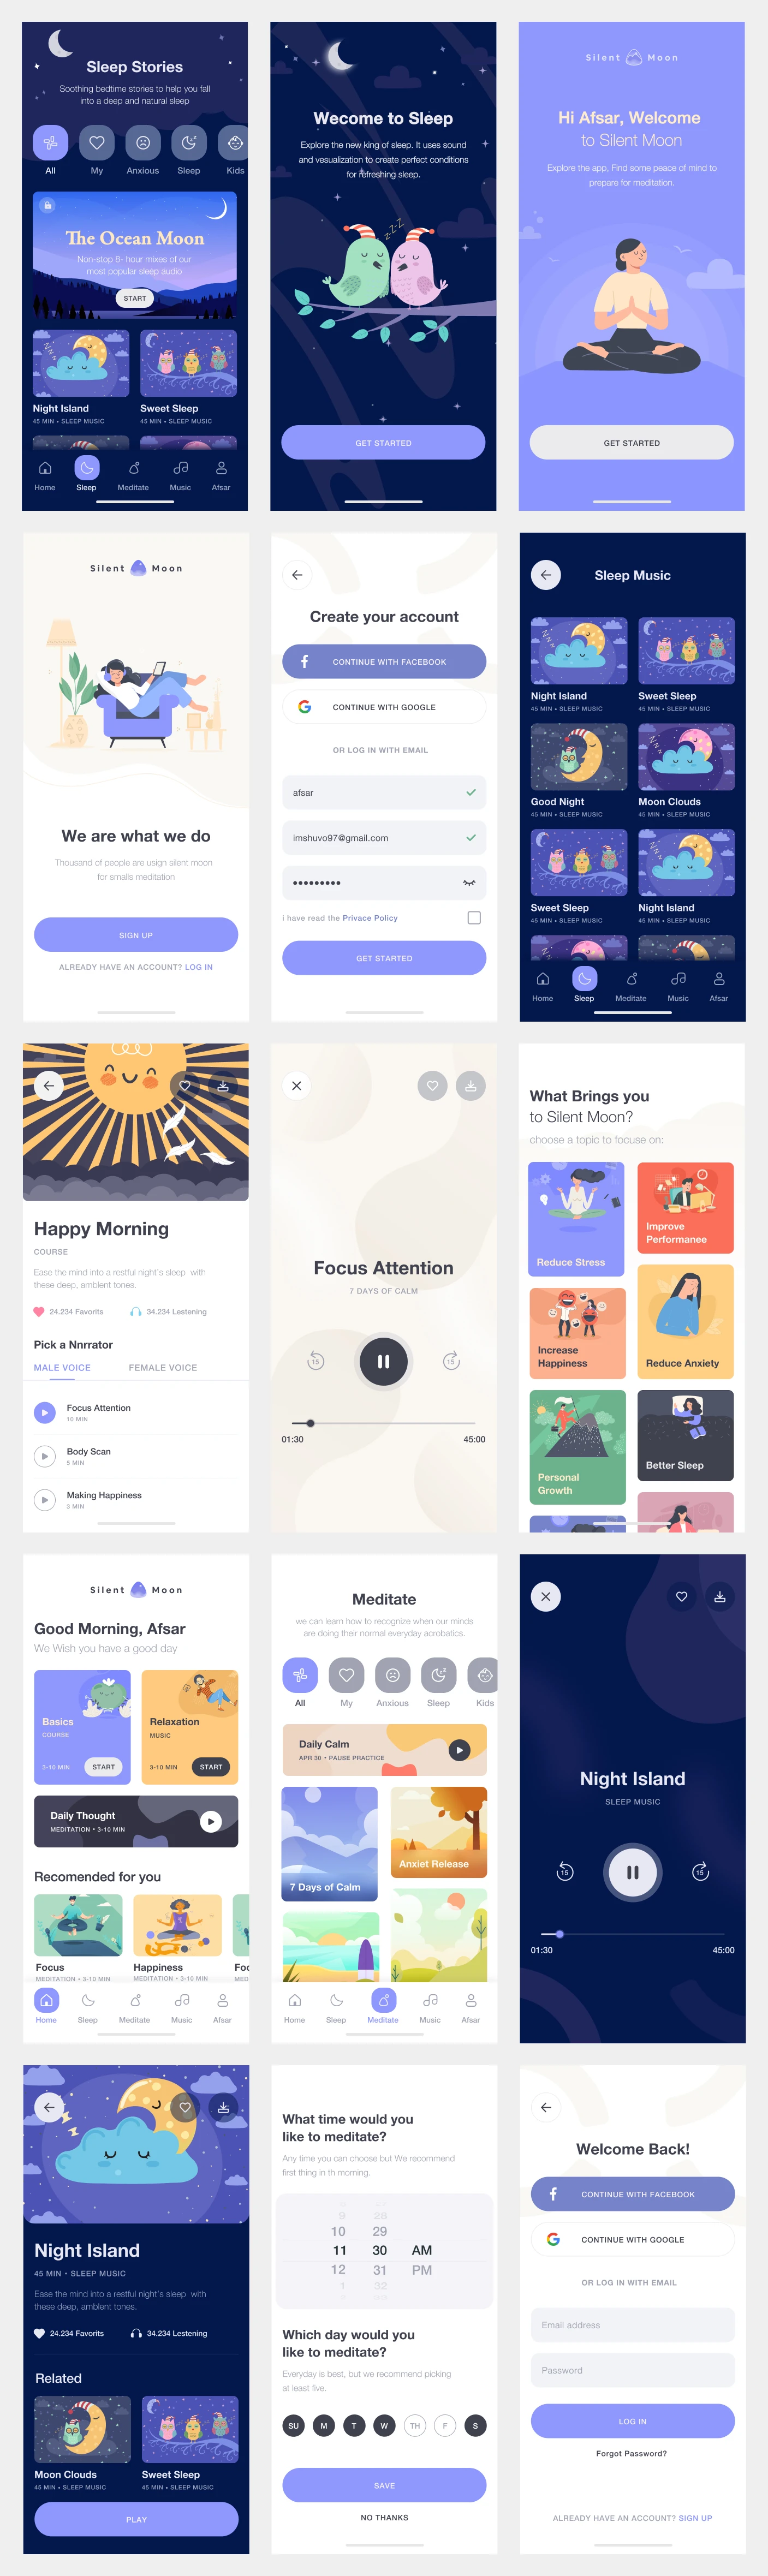 Meditation Free App UI Kit for Figma - Meditation helps you to recover your original, true mind. This grows the inner power. There are thousands of benefits from making your mind healthy. We are working on a great meditation app where you can meditate properly in a very comfortable way. Minimal and clean app design, 15+ screens for you to get started.